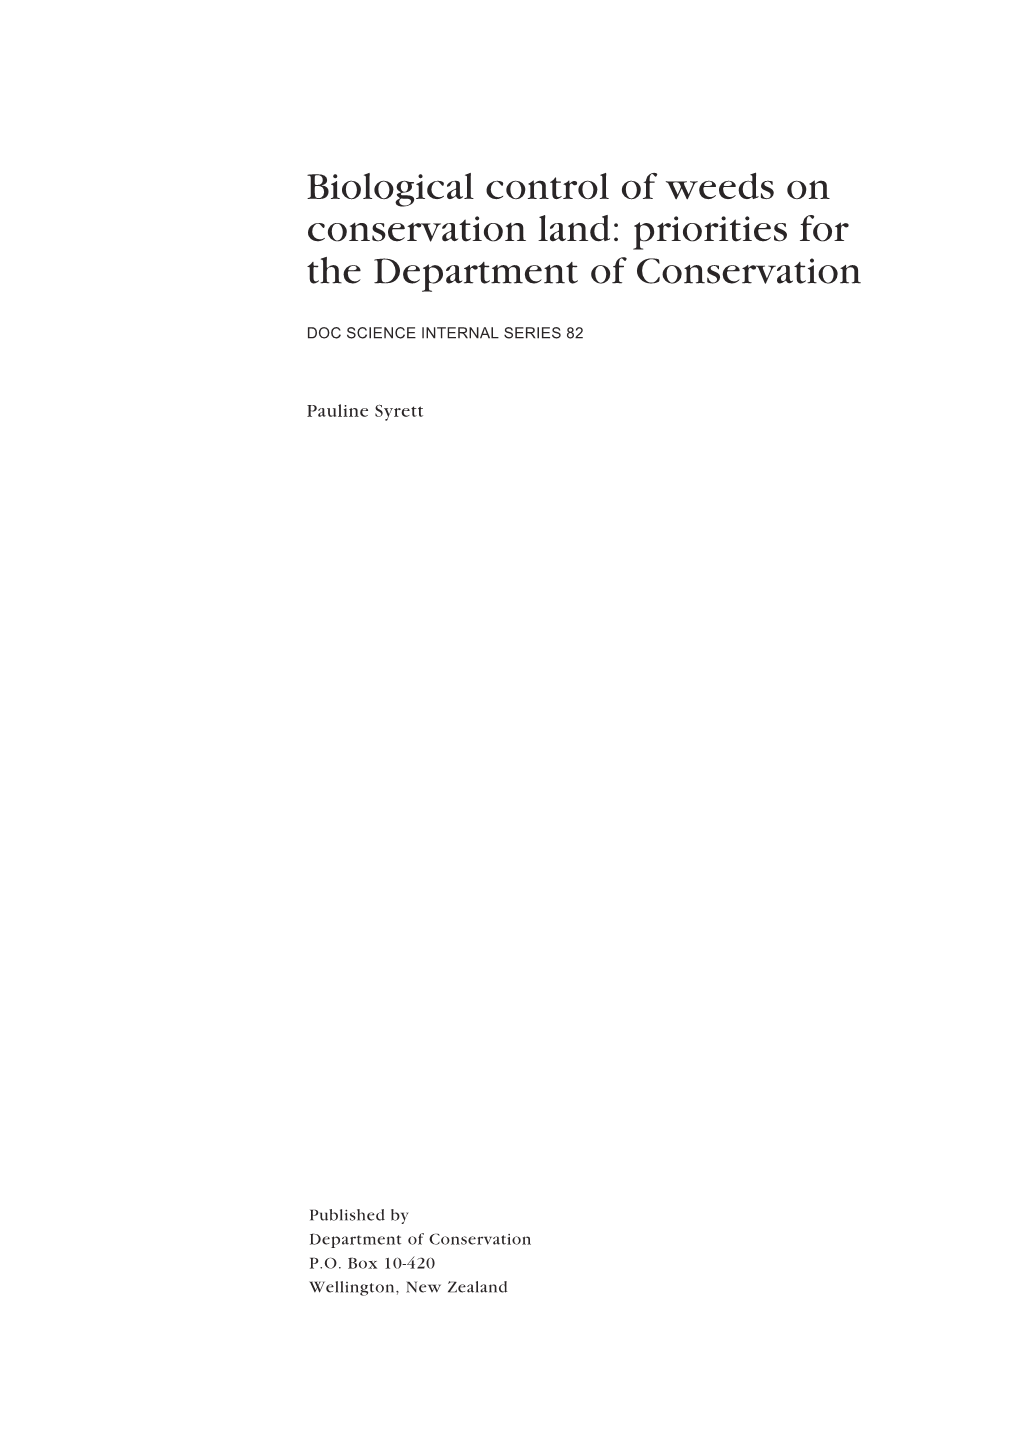 Biological Control of Weeds on Conservation Land: Priorities for the Department of Conservation